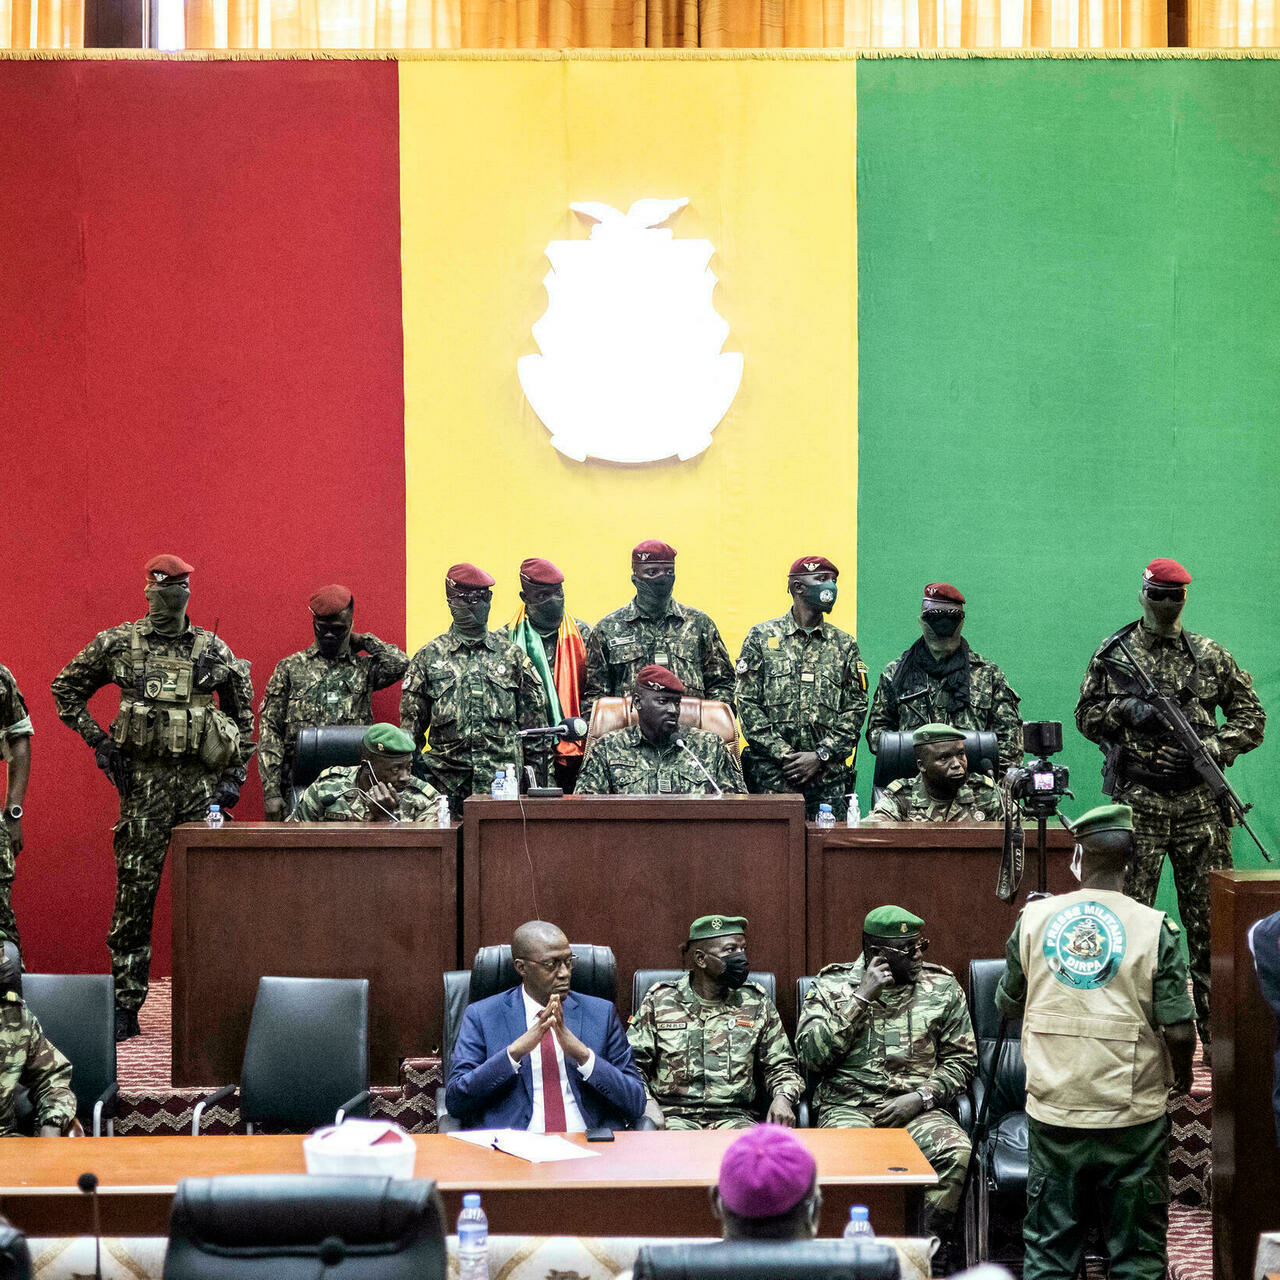 Today marks the deadline for Guinea military junta to begin its government transition back to constitutional order